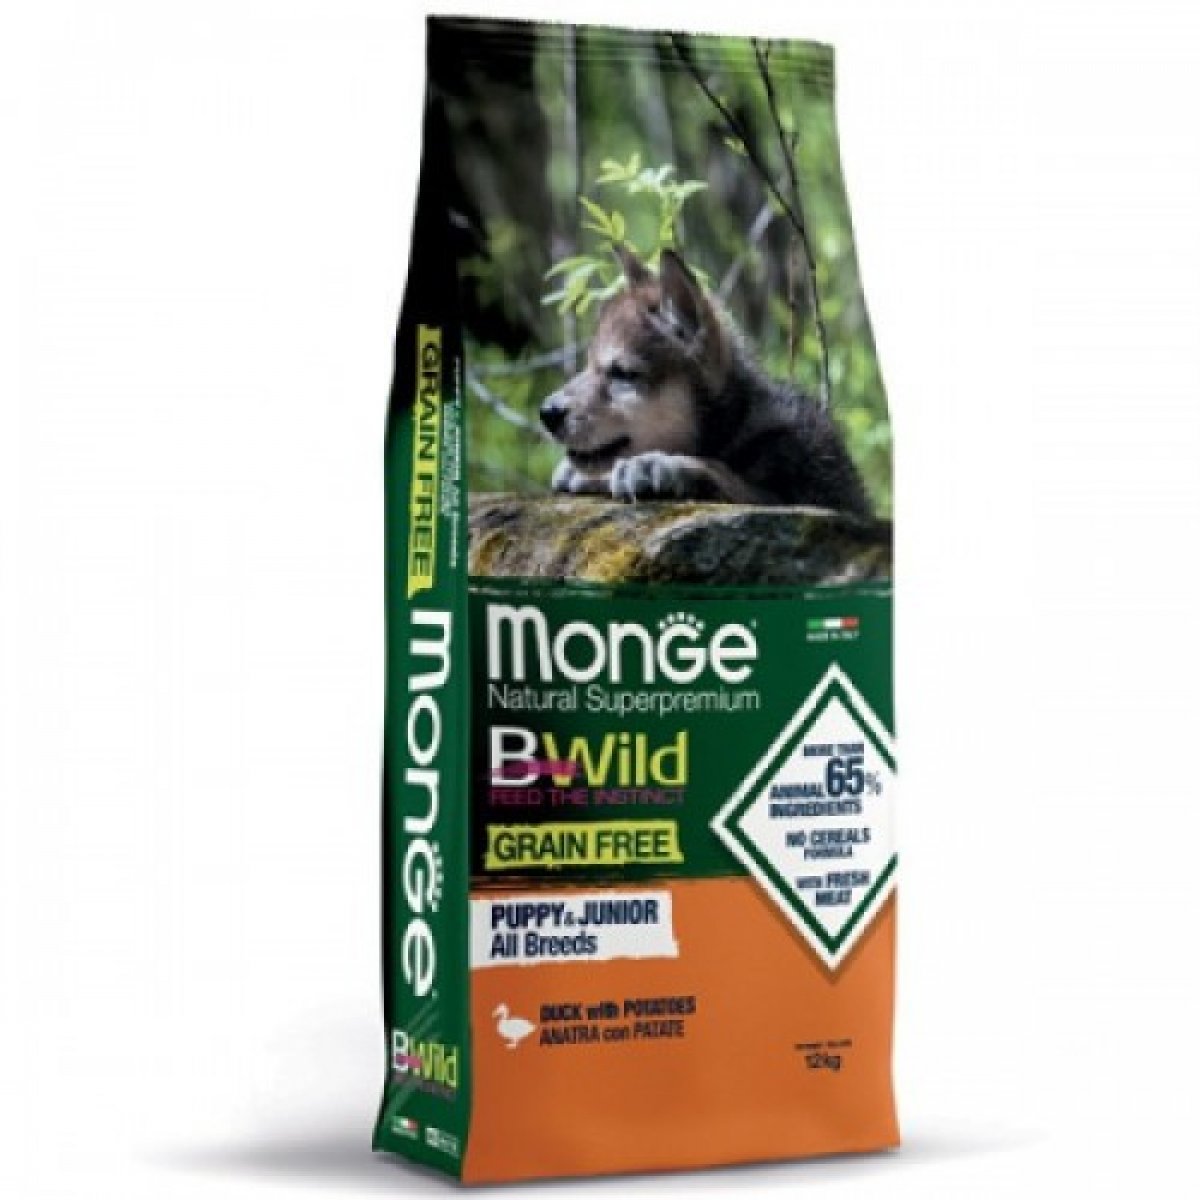 MONGE CANE B-WILD GRAIN FREE ALL BREED PUPPY ANATRA PATATE PISELL12,5KG 